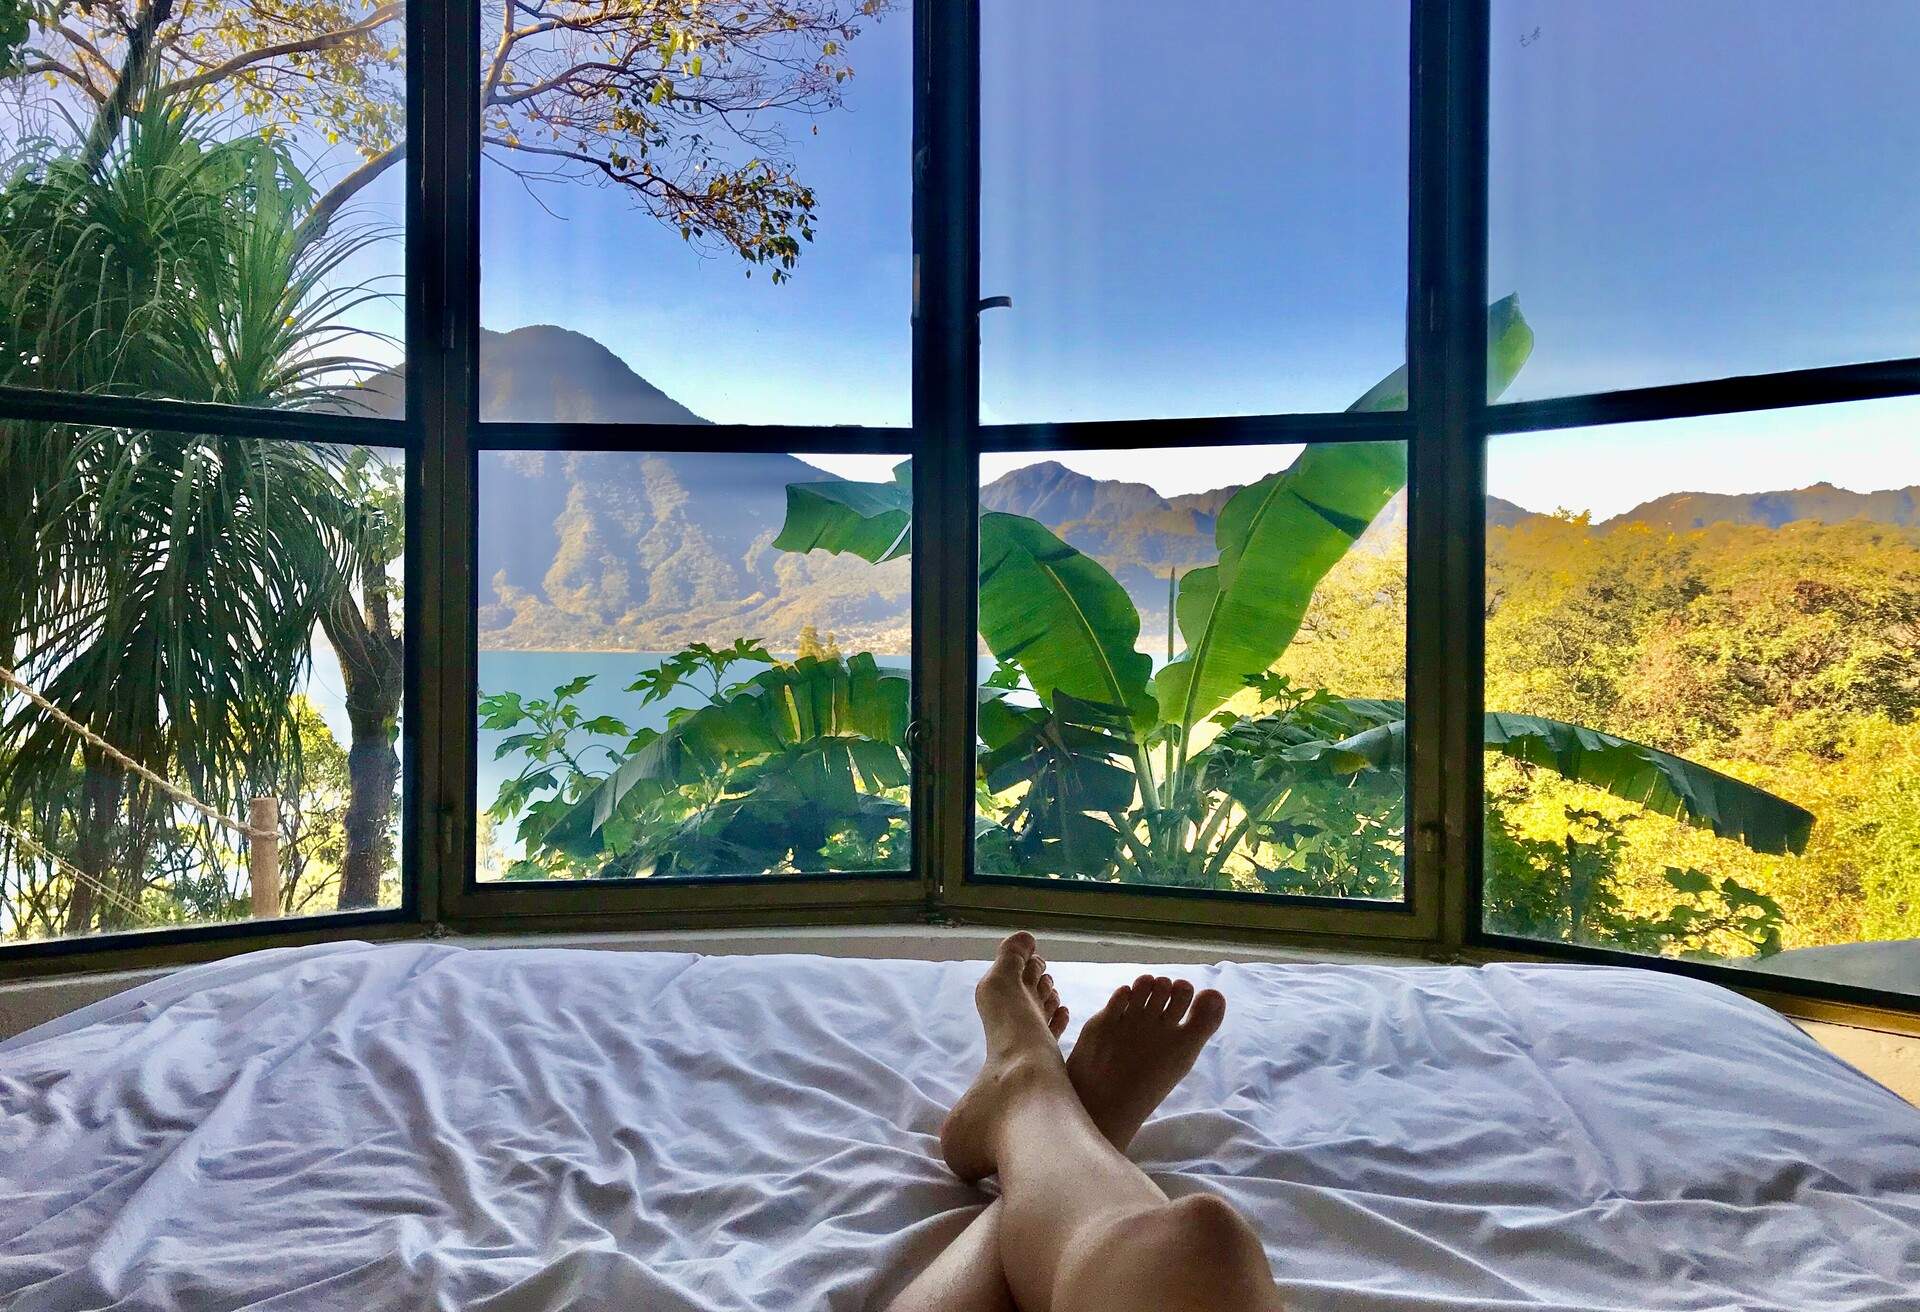 A man lying on the bed with his feet crossed at the ankles, gazing out the window at the trees and mountains.